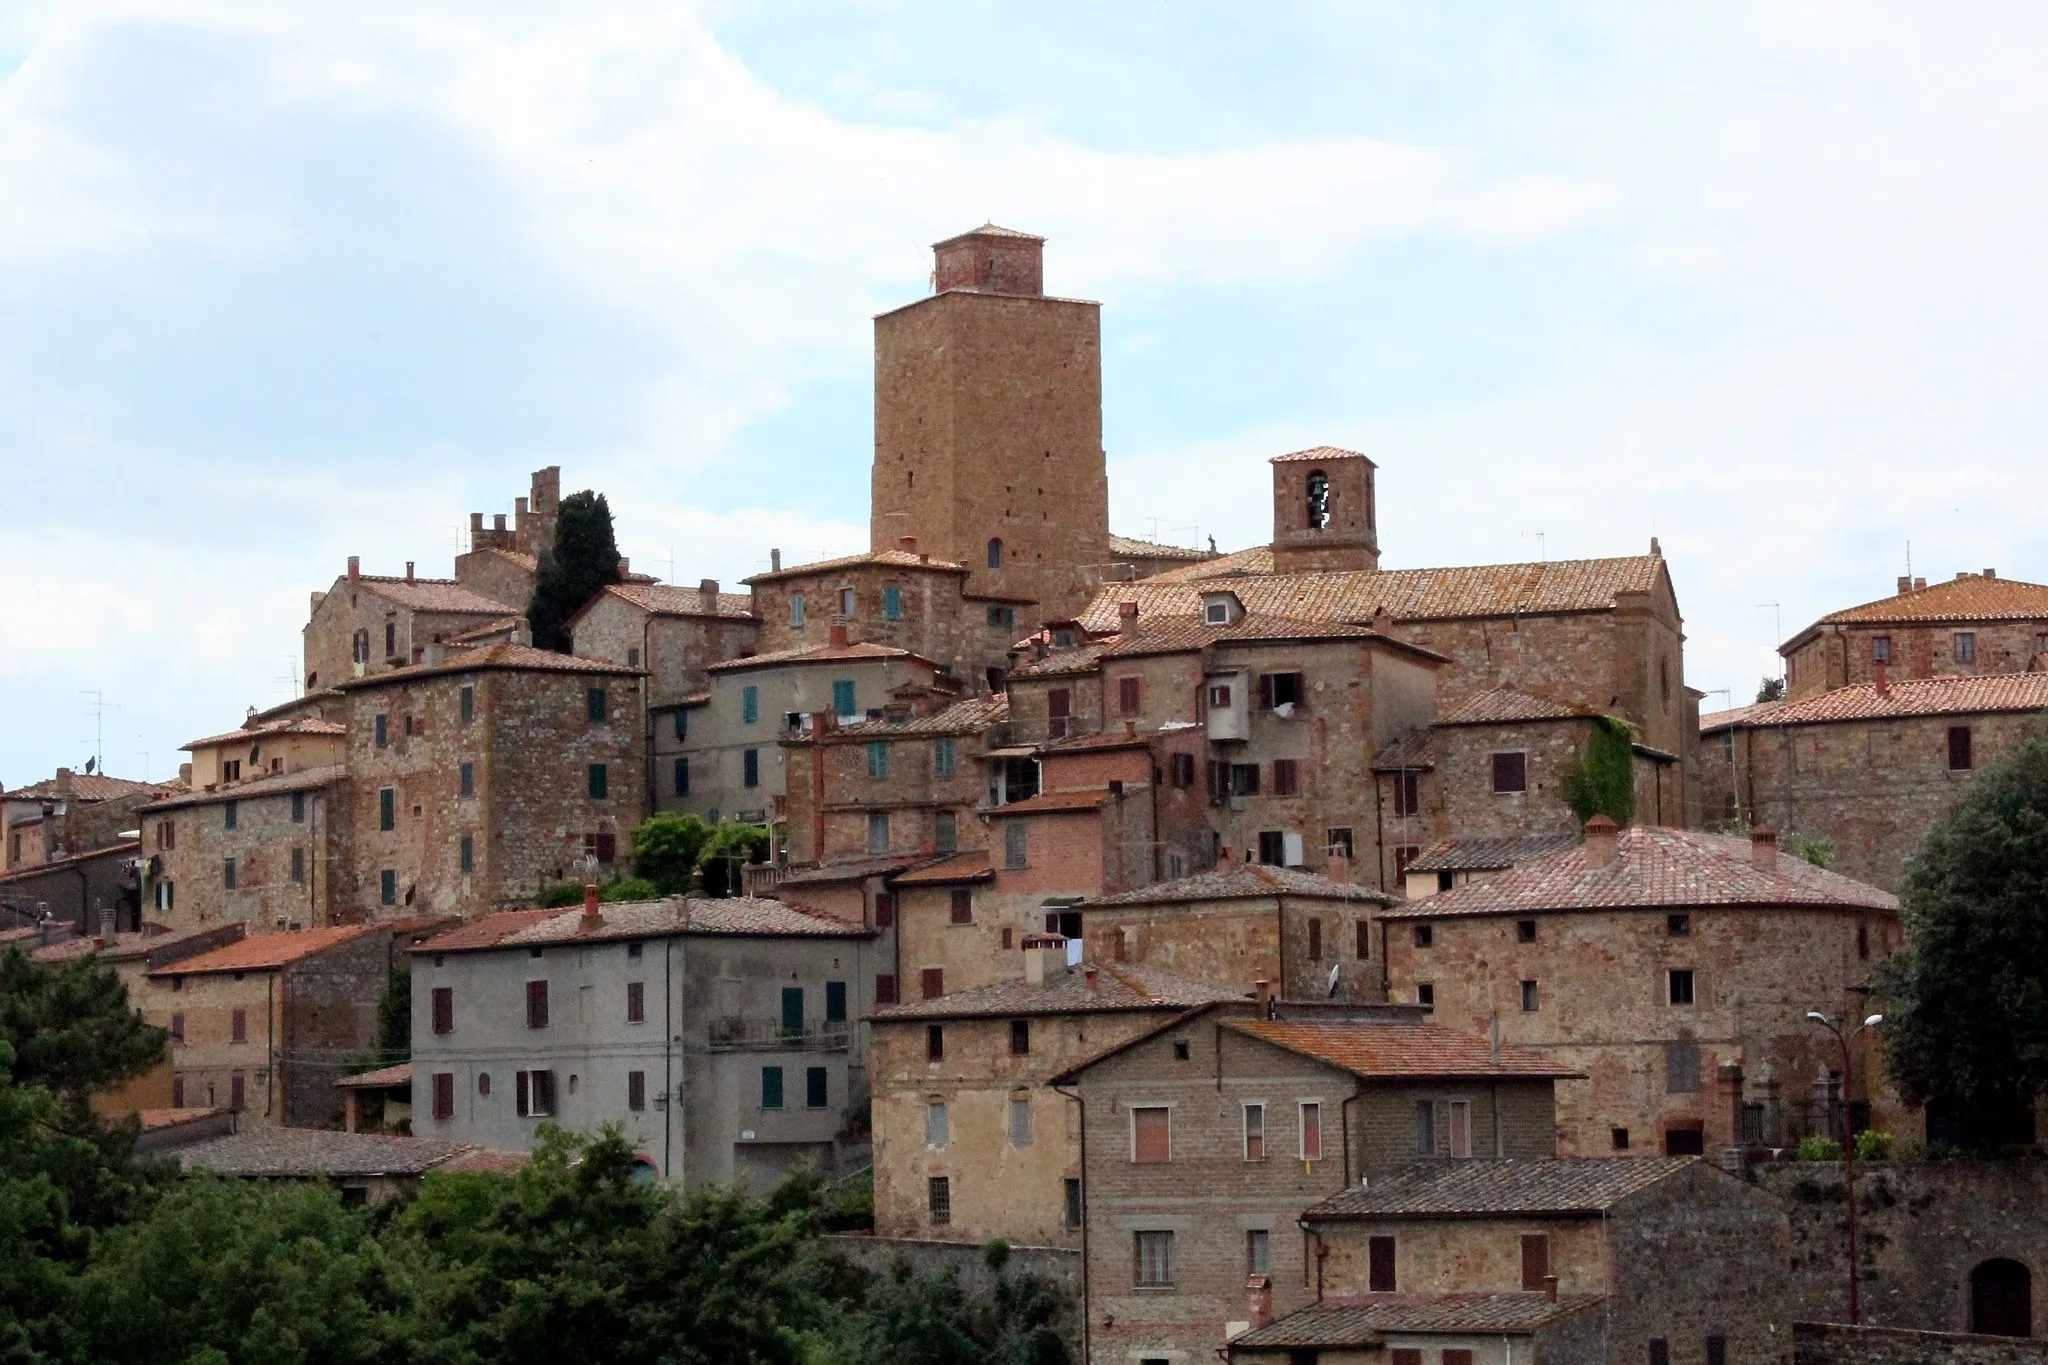 Photo showing: Panorama of Petroio, hamlet of Trequanda, Province of Siena, Tuscany, Italy.
From left to right: Torre del Cassero, Torre Civica, Church Pietro e Paolo